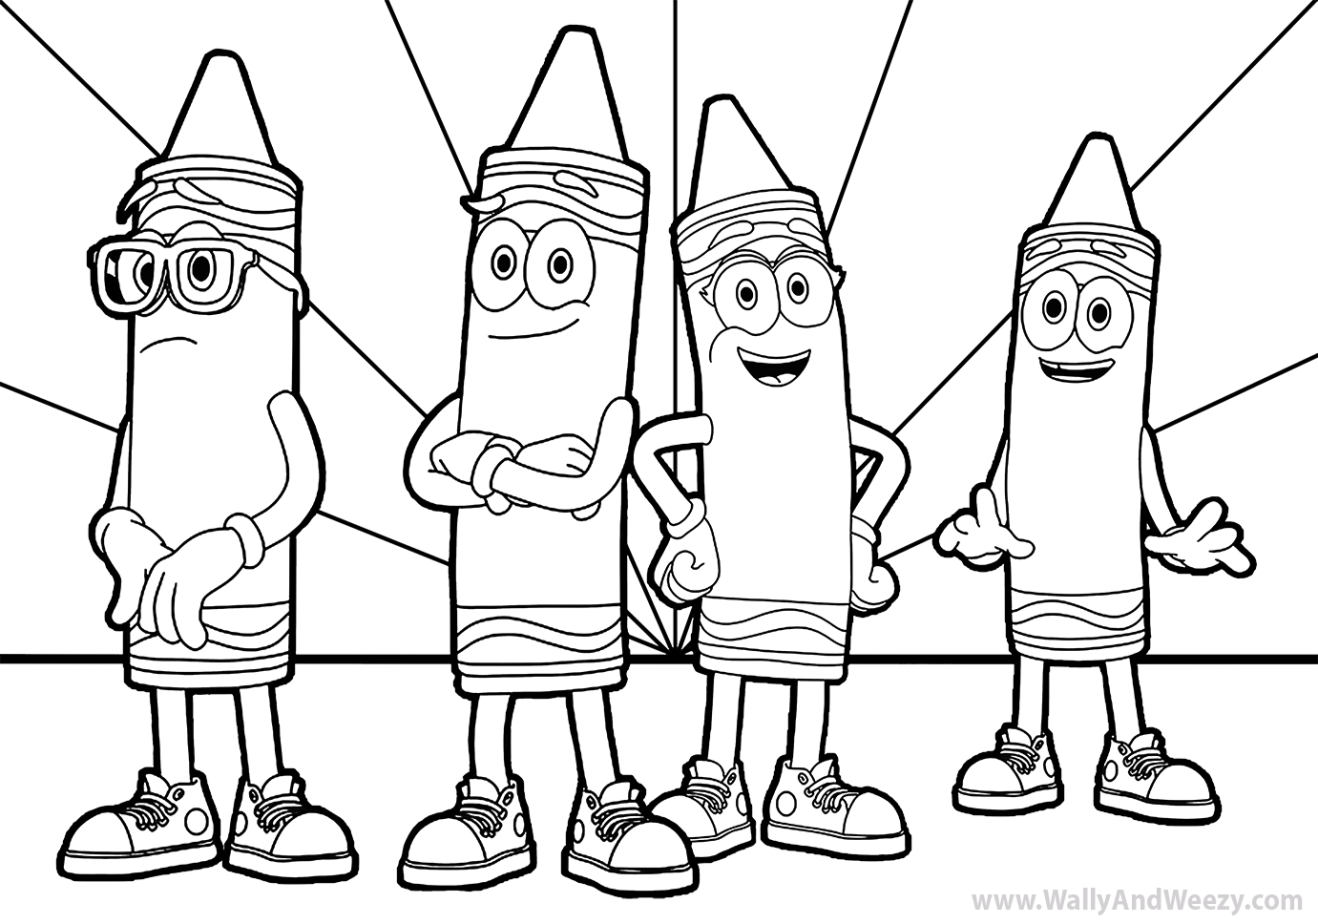 Coloring Pages Archives - Wally and Weezy